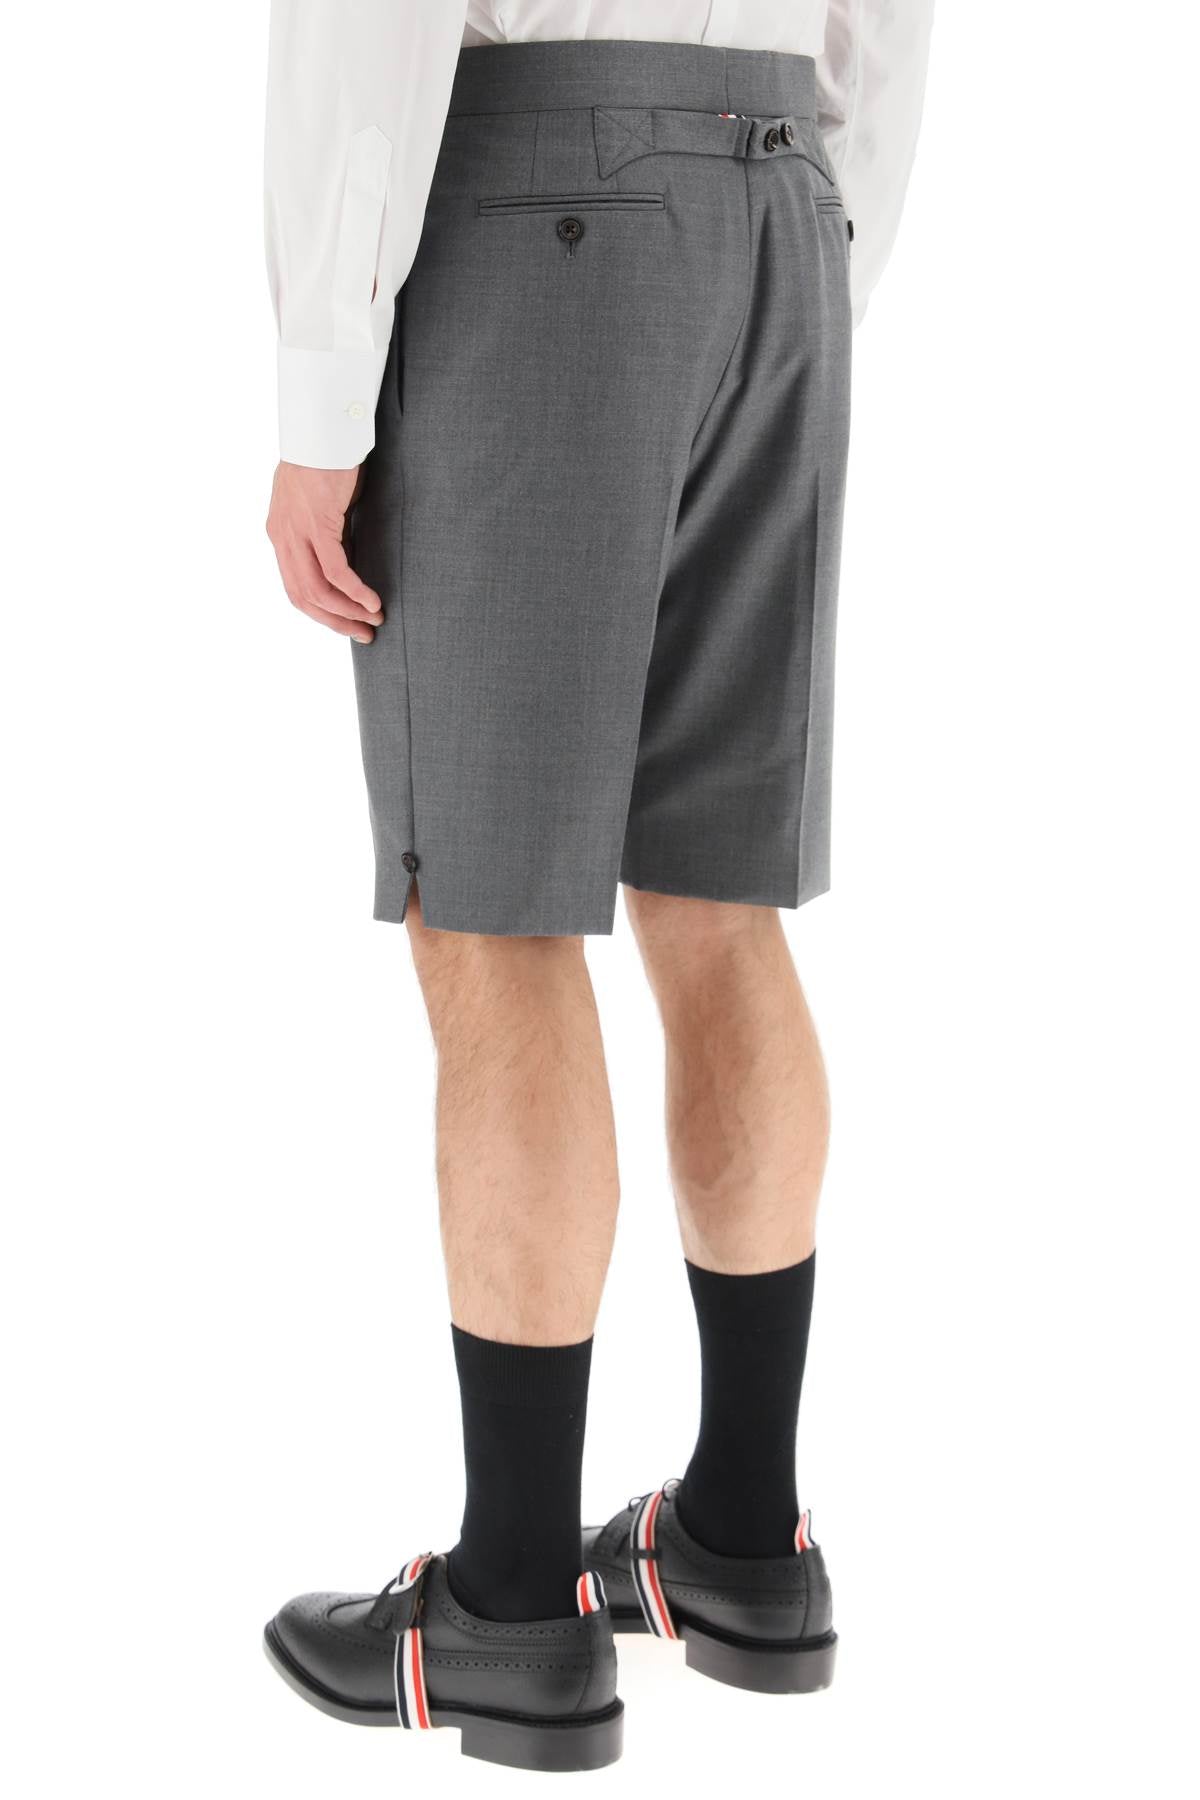 Thom browne super 120's wool shorts with back strap-2